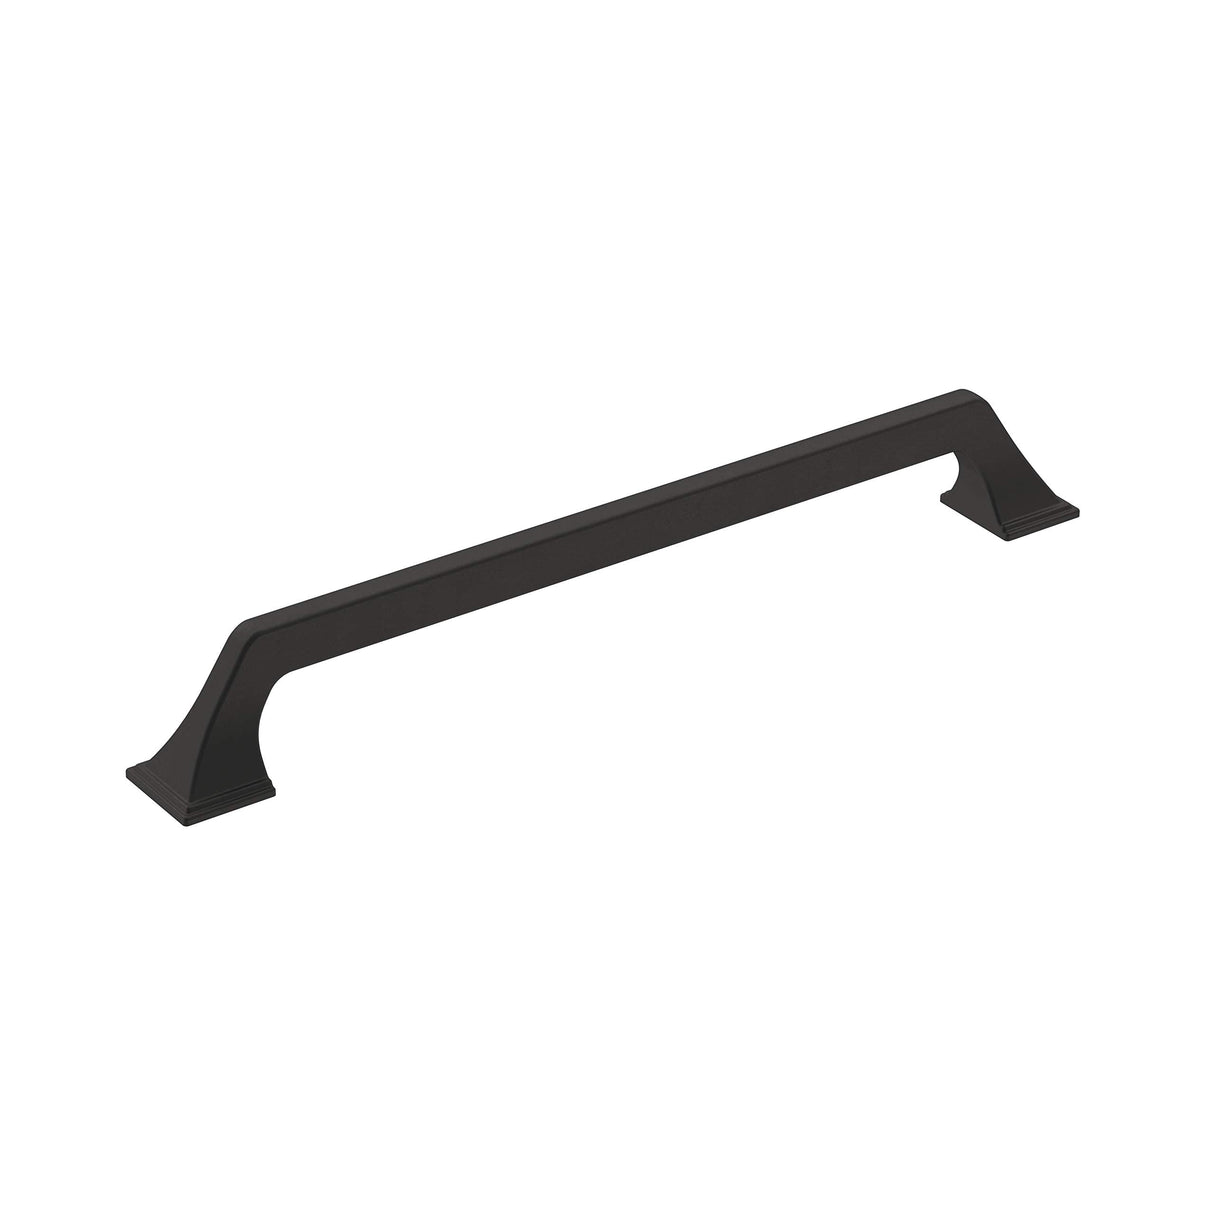 Amerock Cabinet Pull Matte Black 8-13/16 inch (224 mm) Center-to-Center Exceed 1 Pack Drawer Pull Cabinet Handle Cabinet Hardware